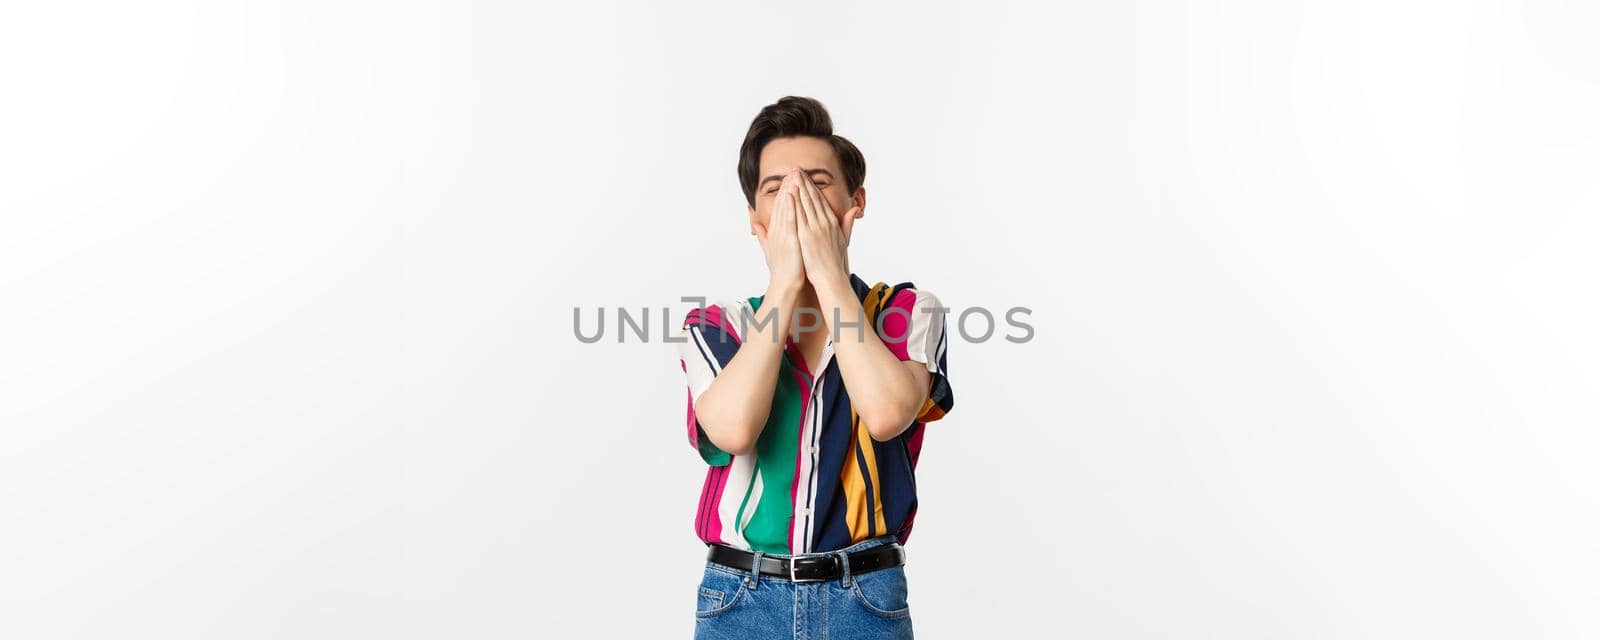 Image of young stylish man sneezing in hands, standing over white background.